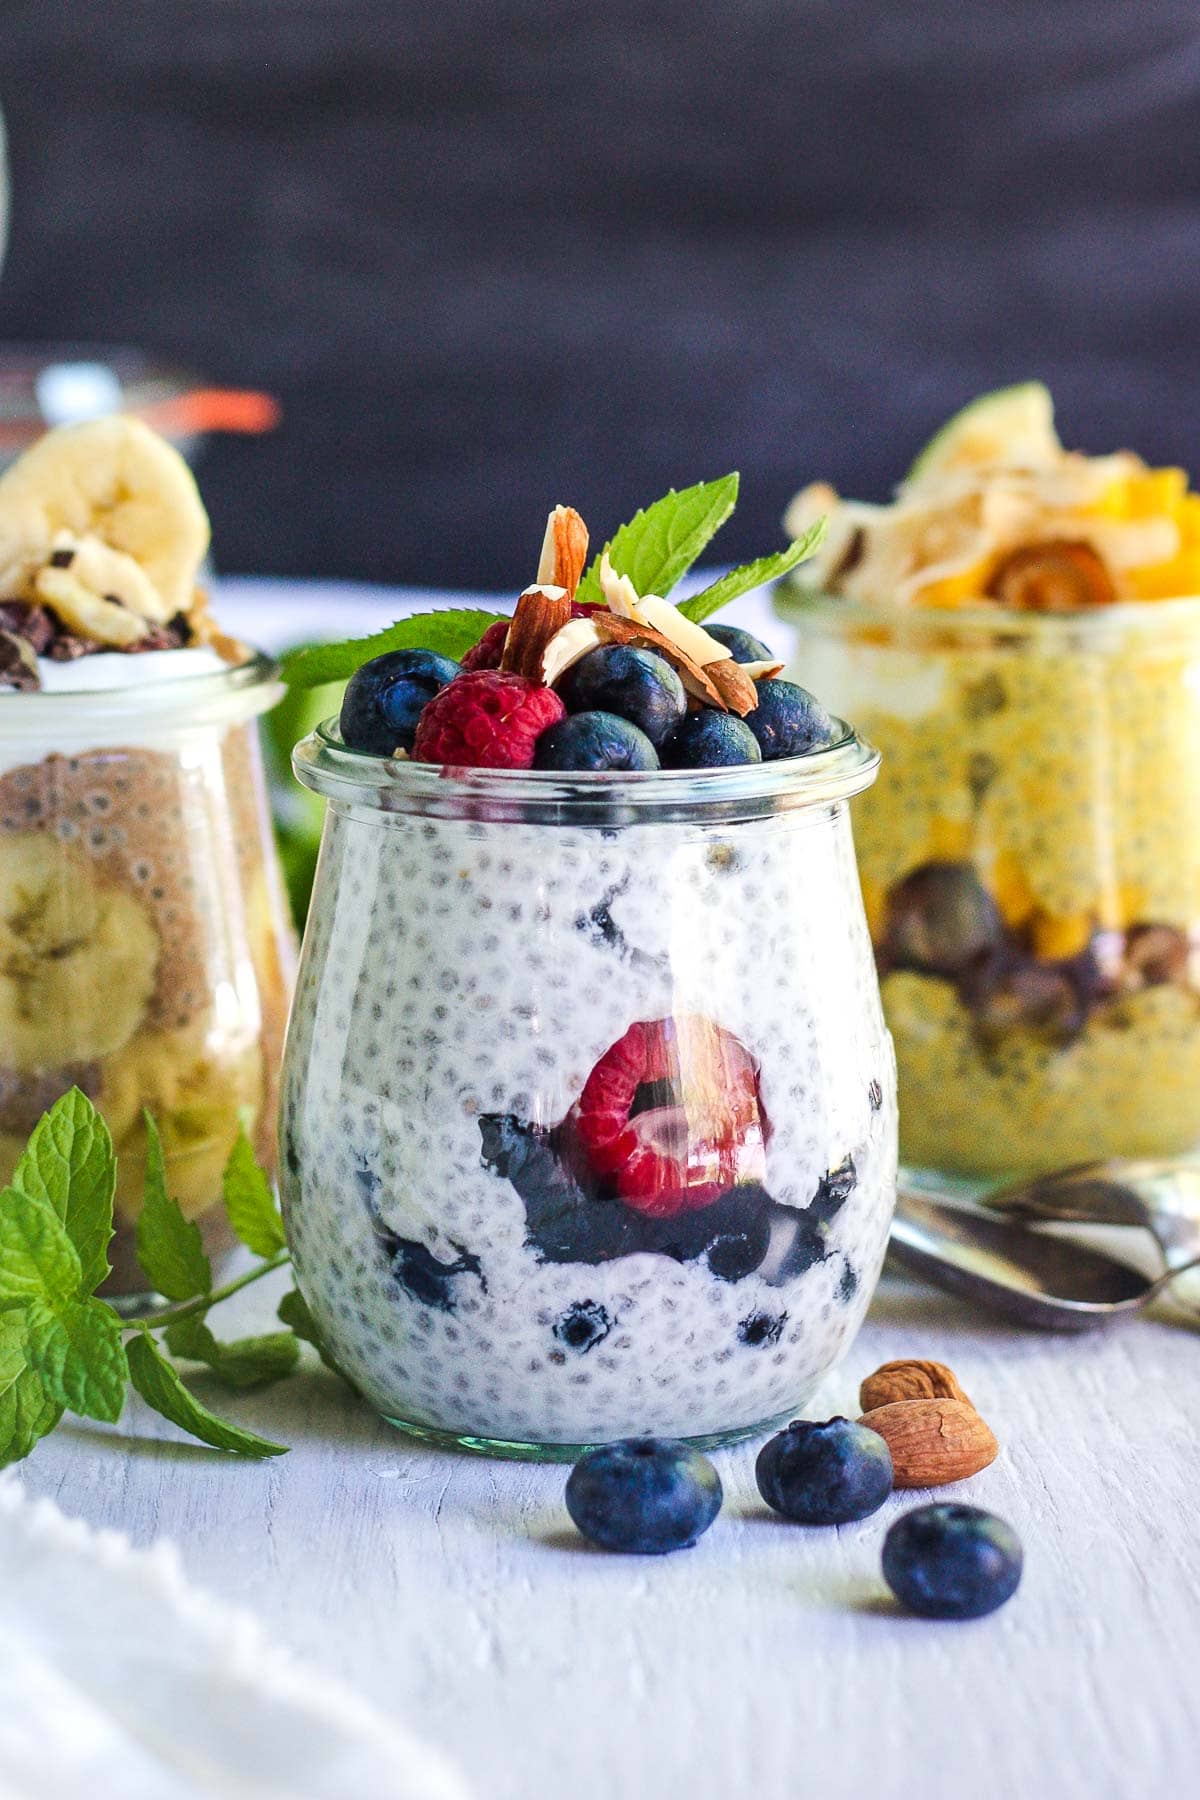 Chia pudding in jars with berries.